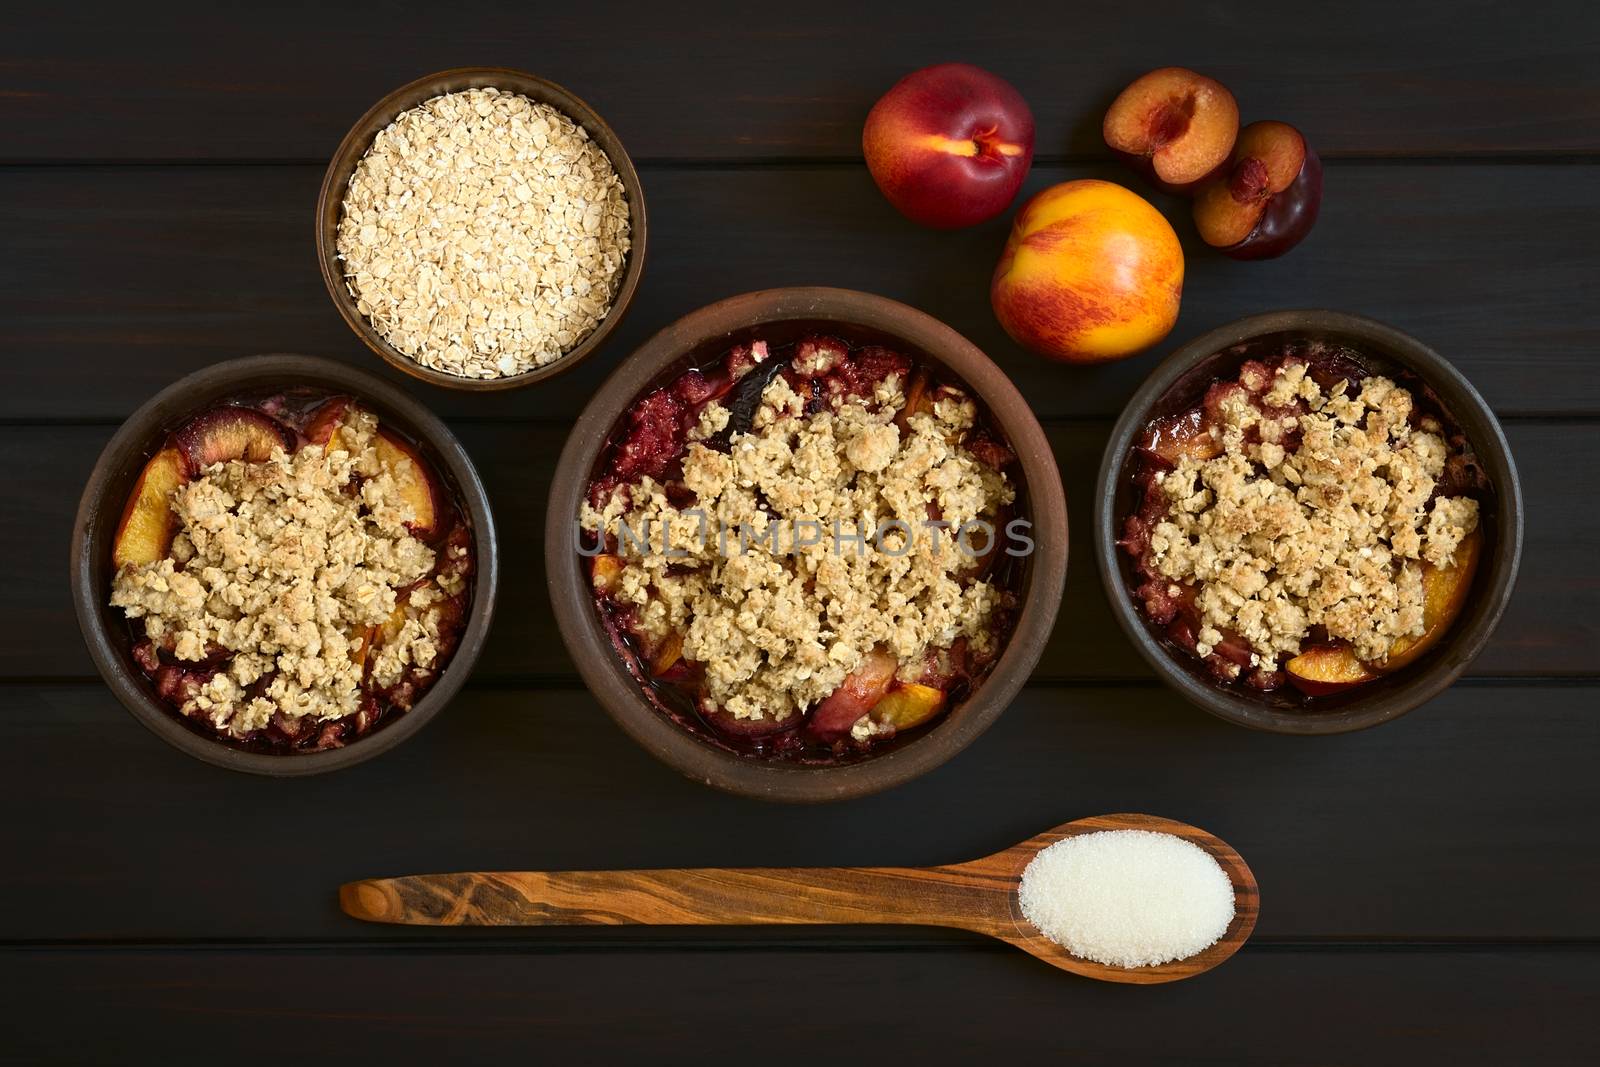 Overhead shot of three rustic bowls filled with baked plum and nectarine crumble or crisp, photographed on dark wood with natural light